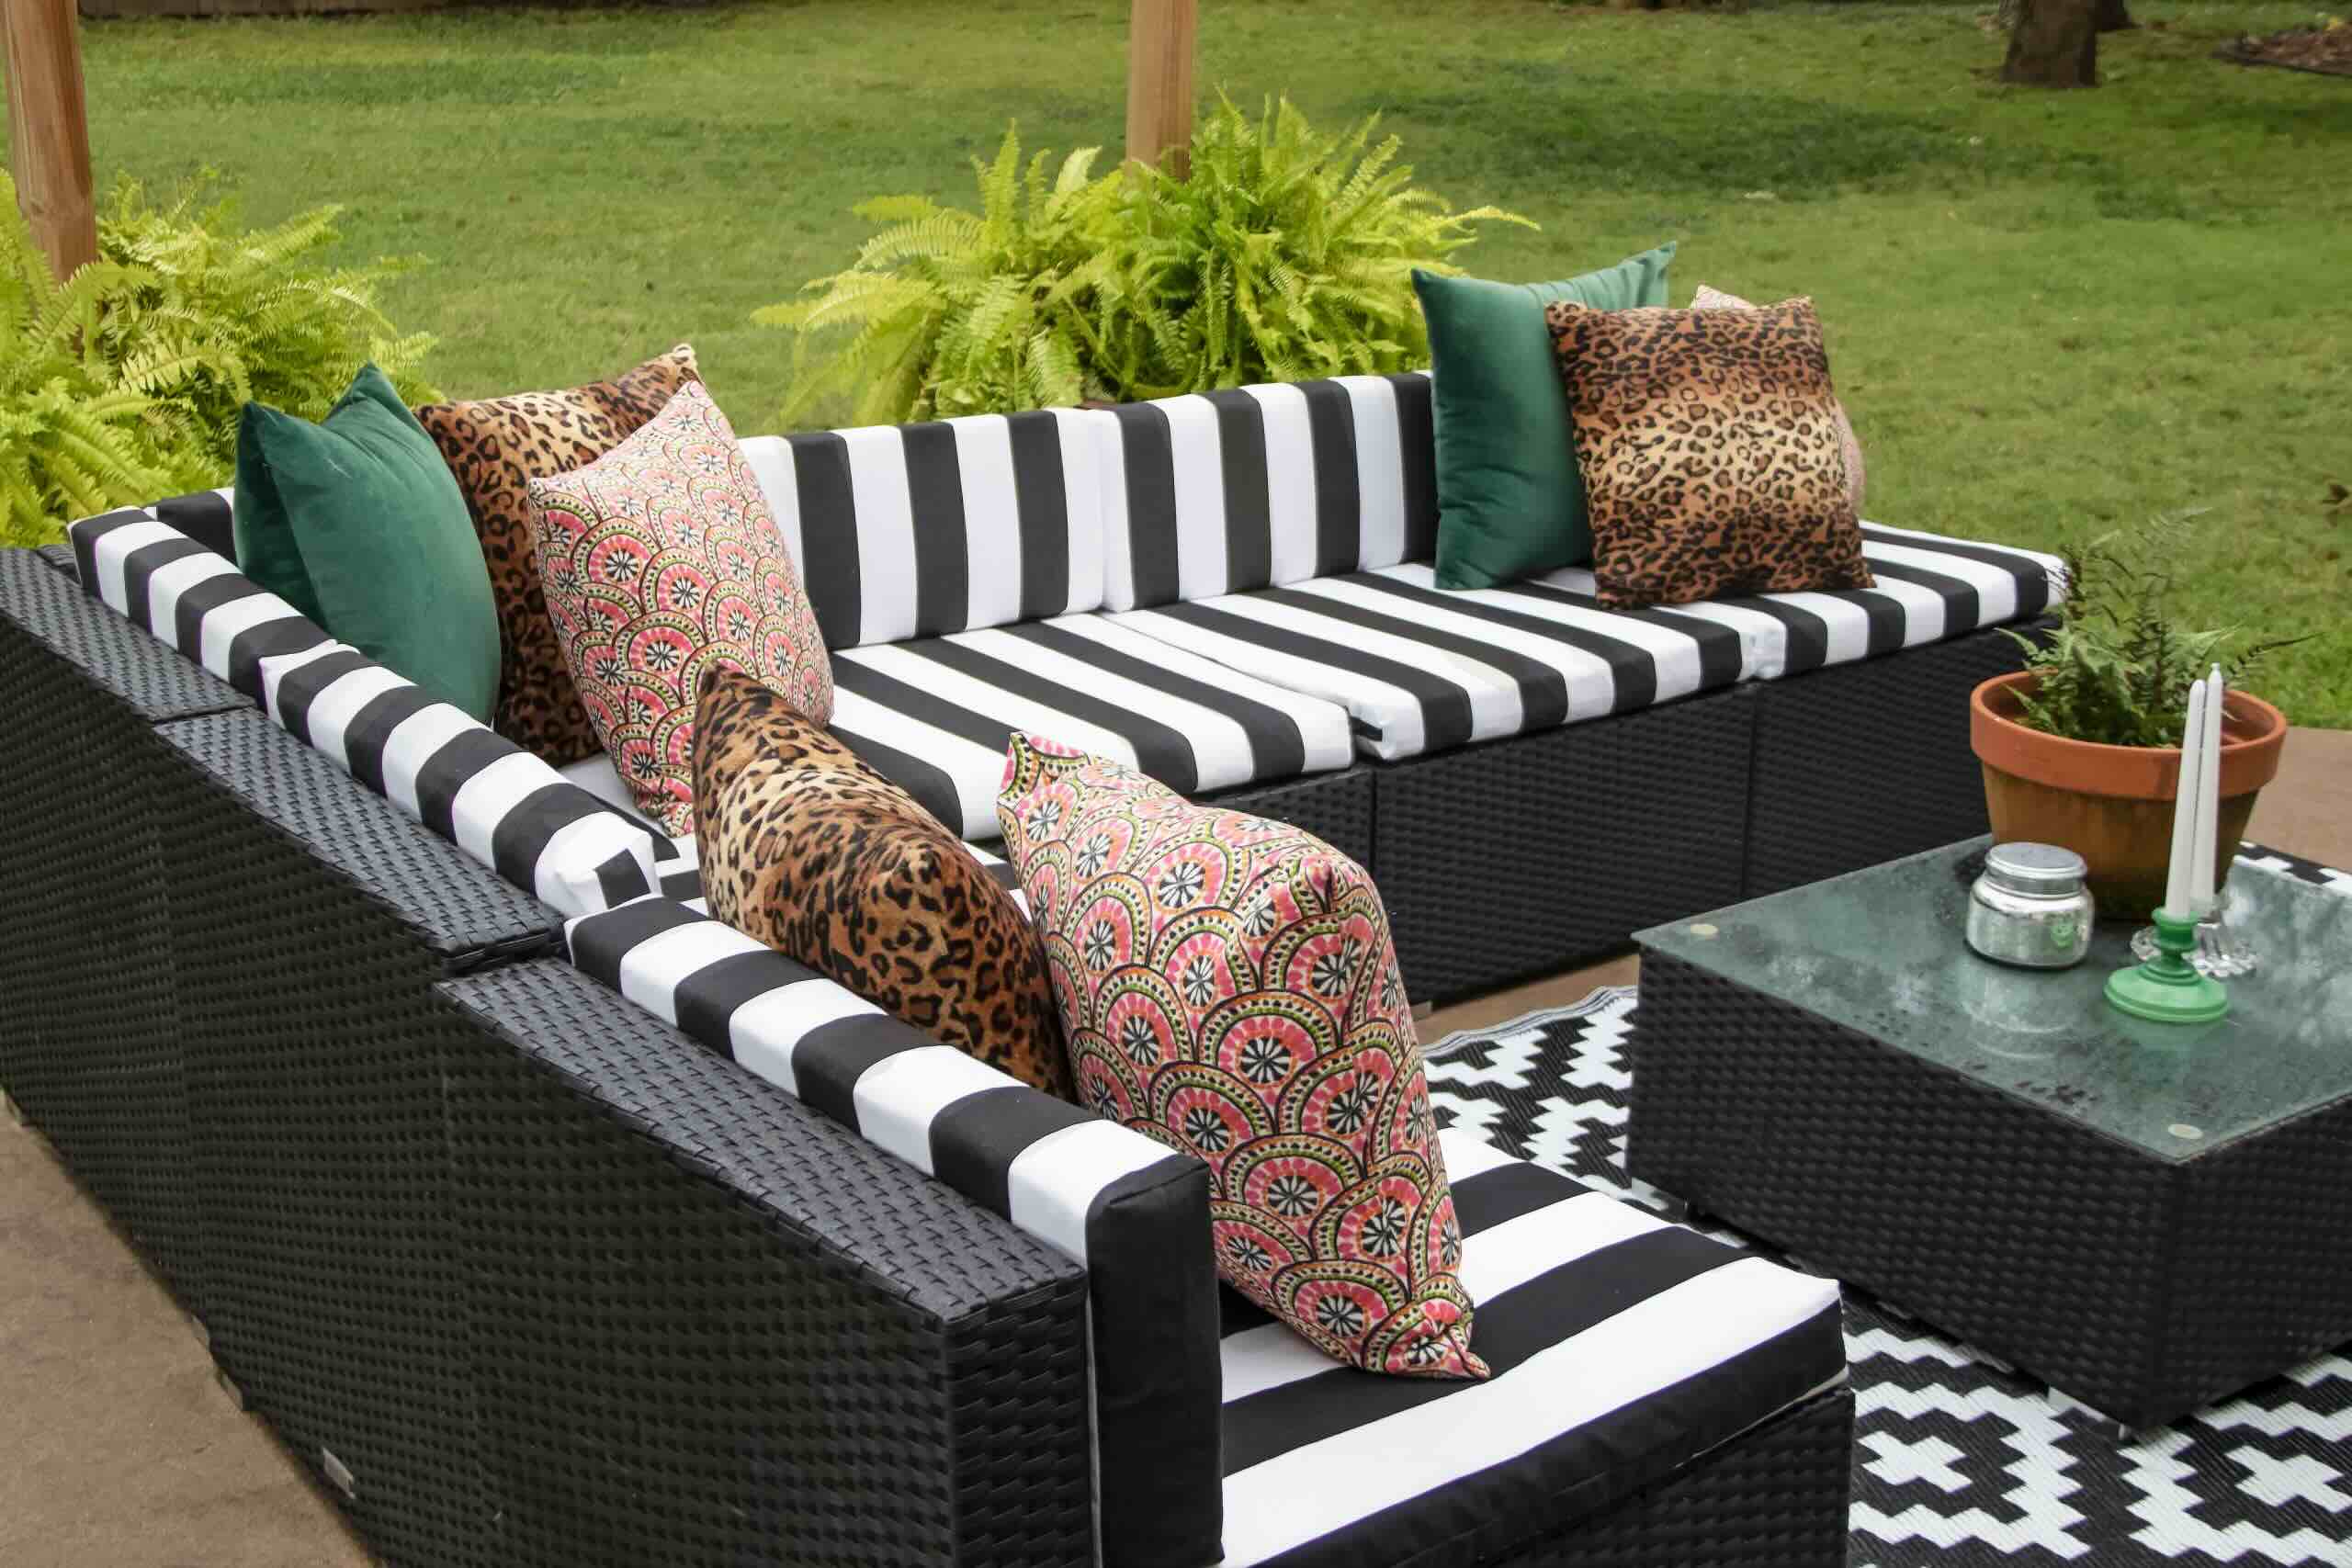 How To Replace Outdoor Furniture Cushions